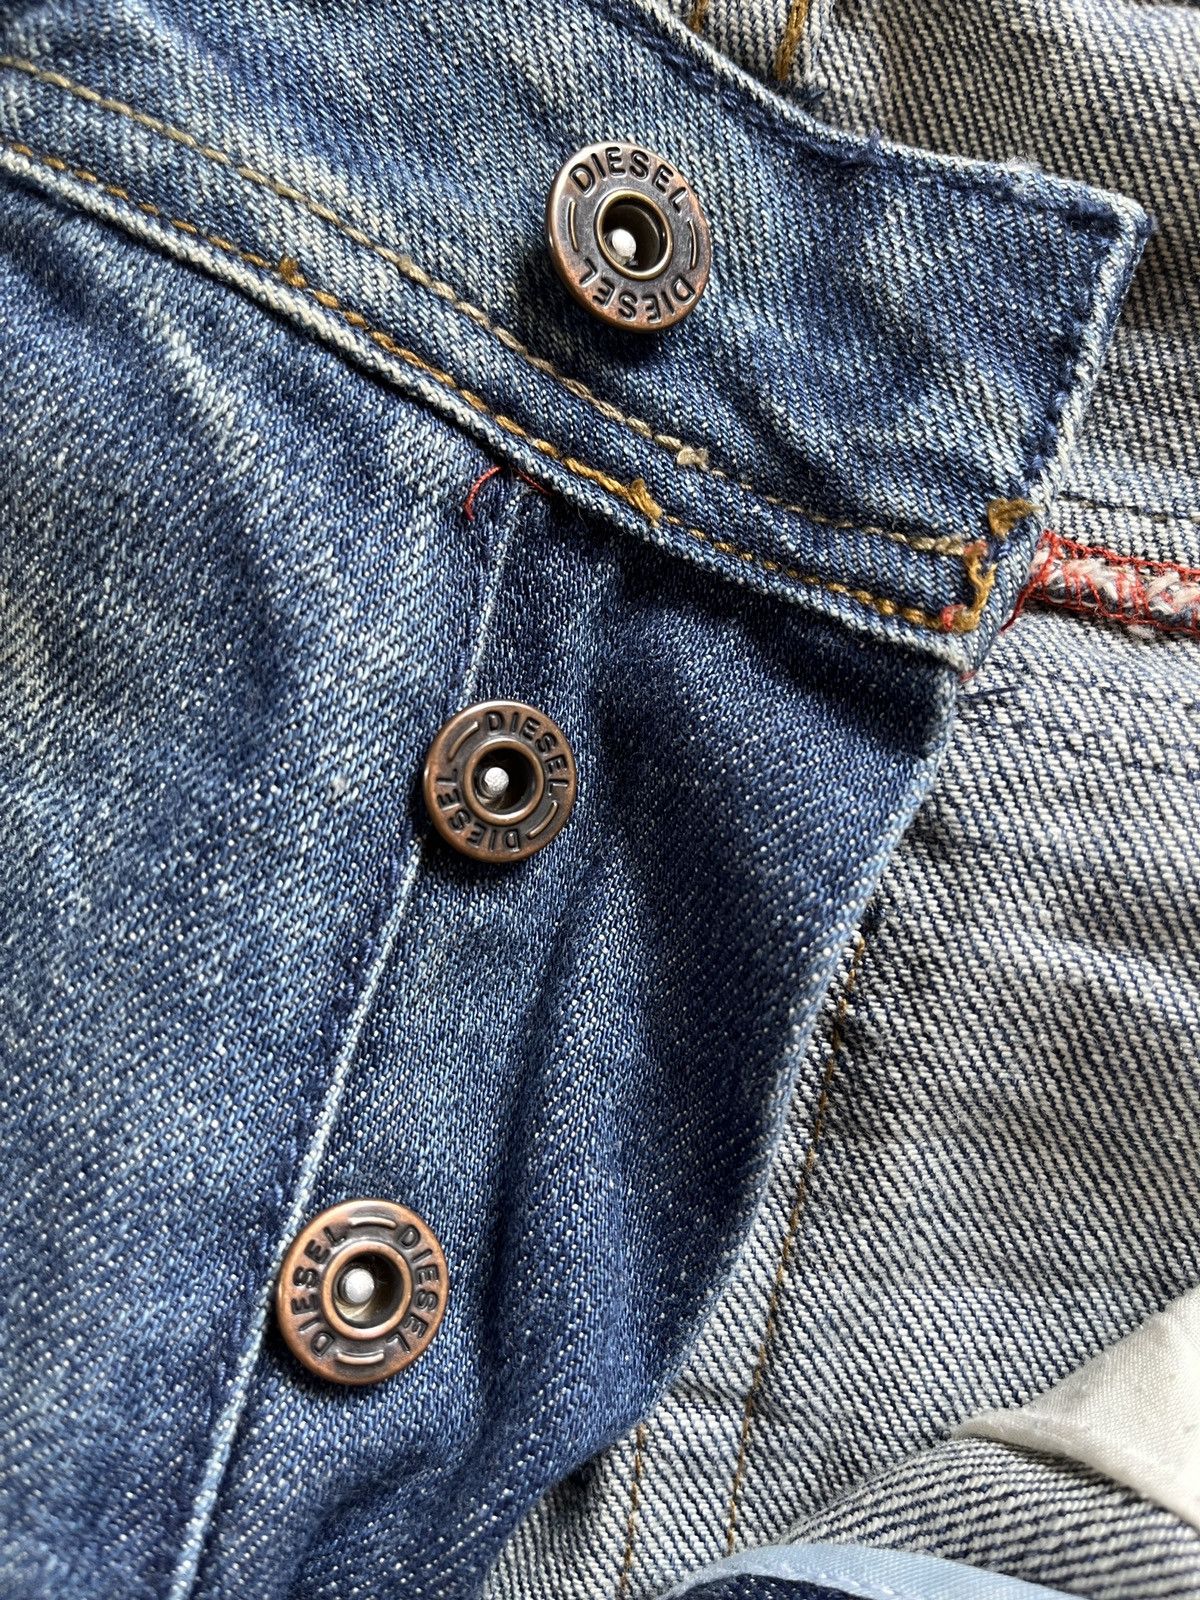 VINTAGE FADED DIESEL FLARE DENIM JEANS MADE IN ITALY - 7